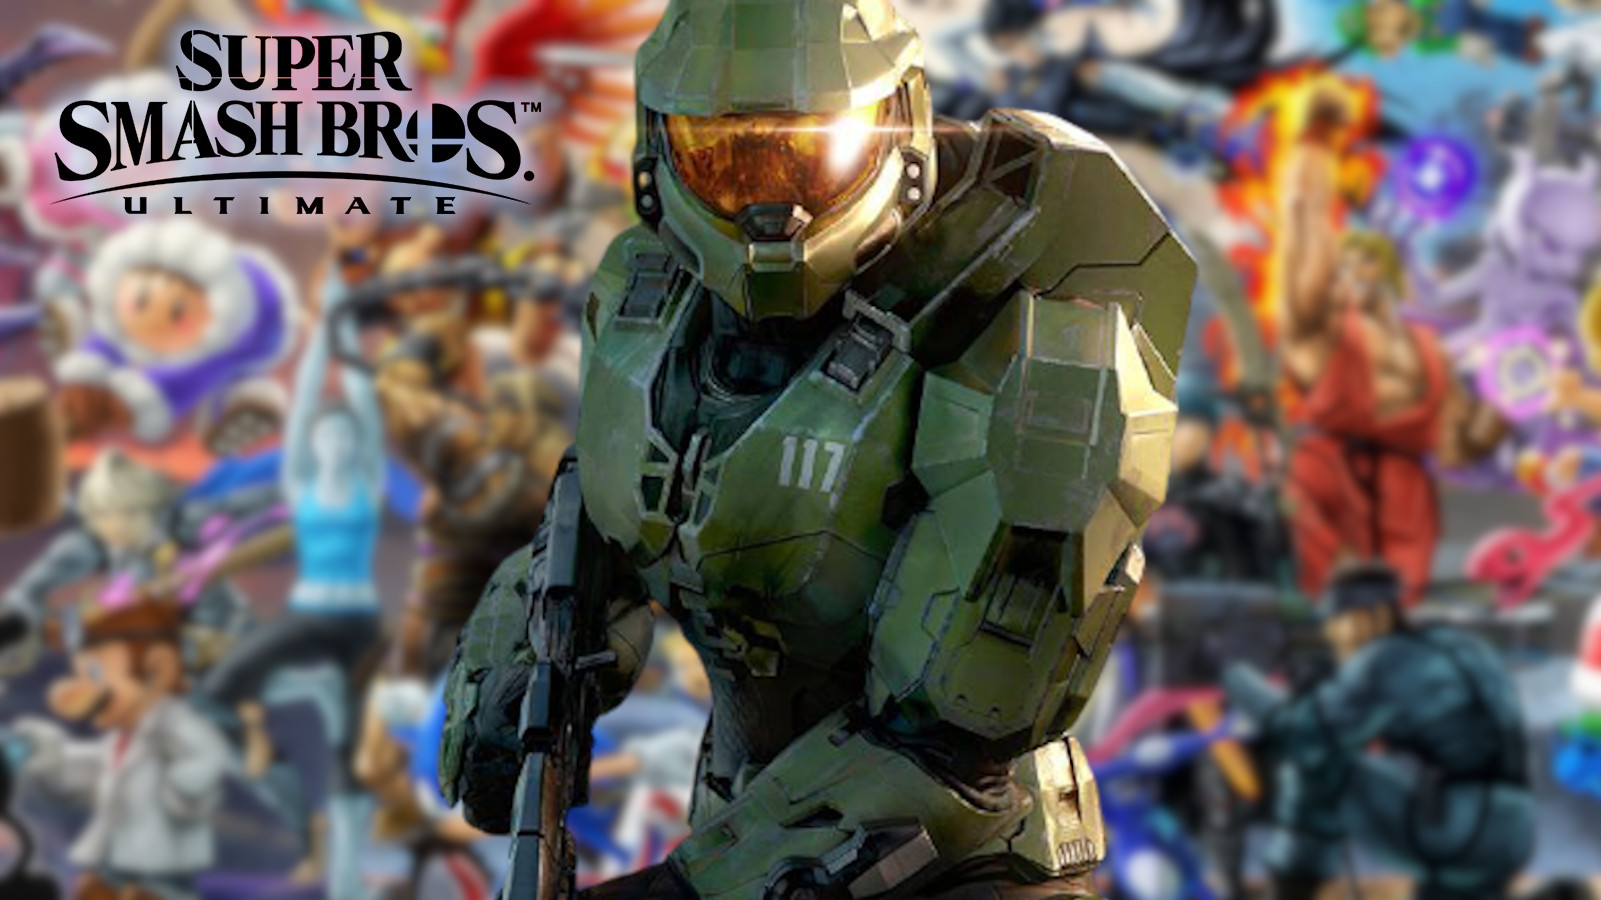 Super Smash. Bros Ultimate': 'Halo's' Master Chief Ruled Out As